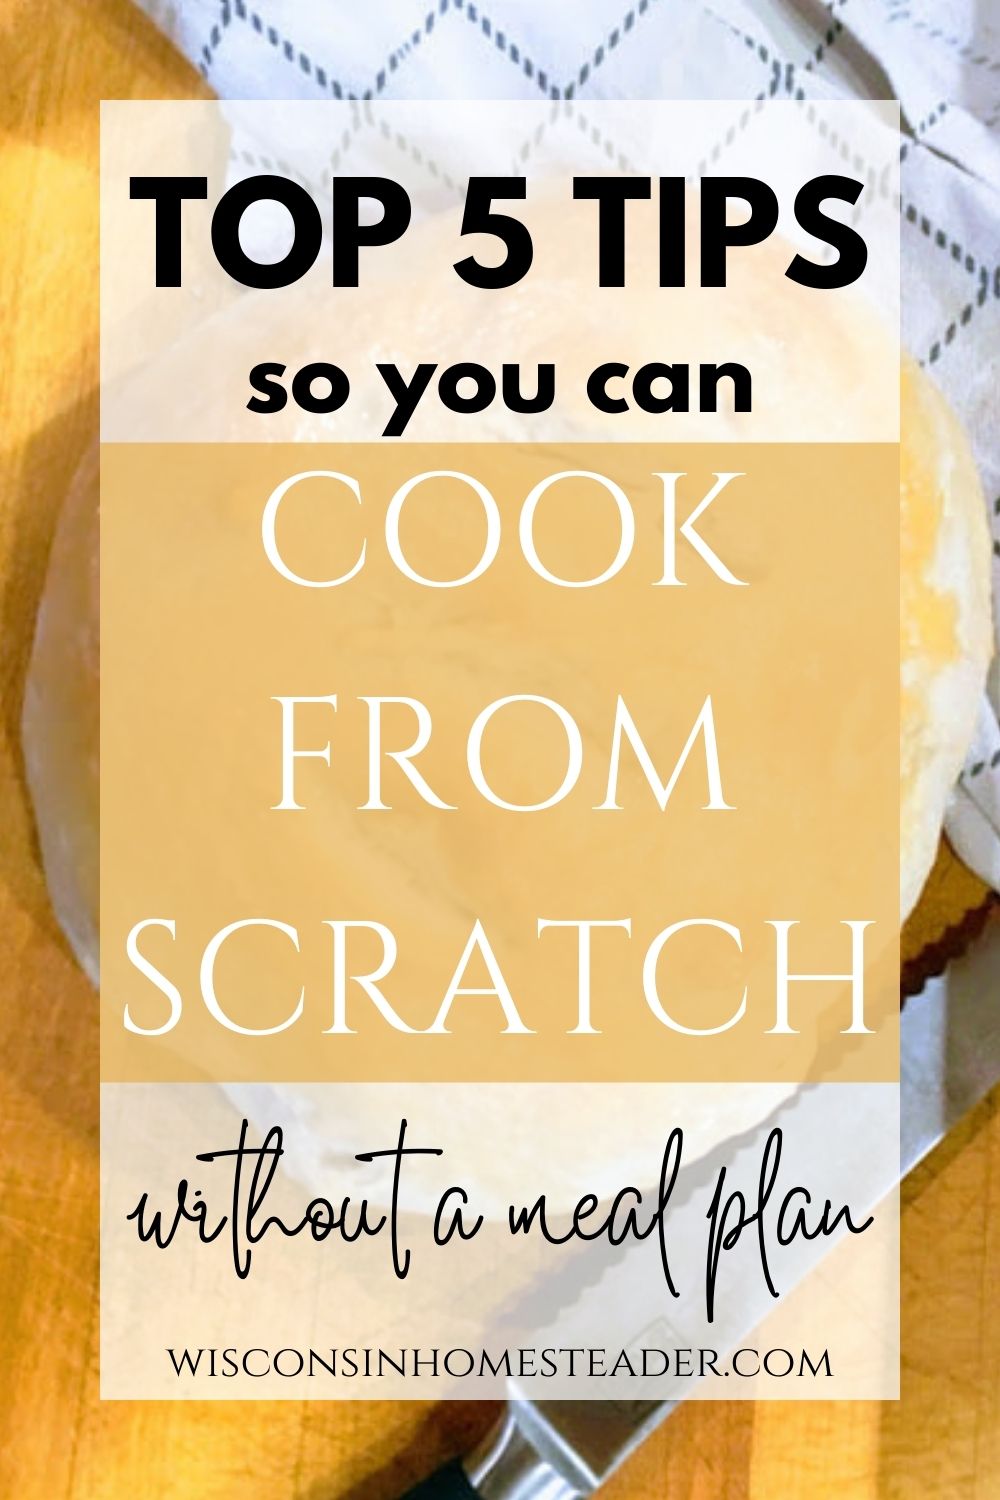 top 5 tips so you can cook from scratch without a meal plan